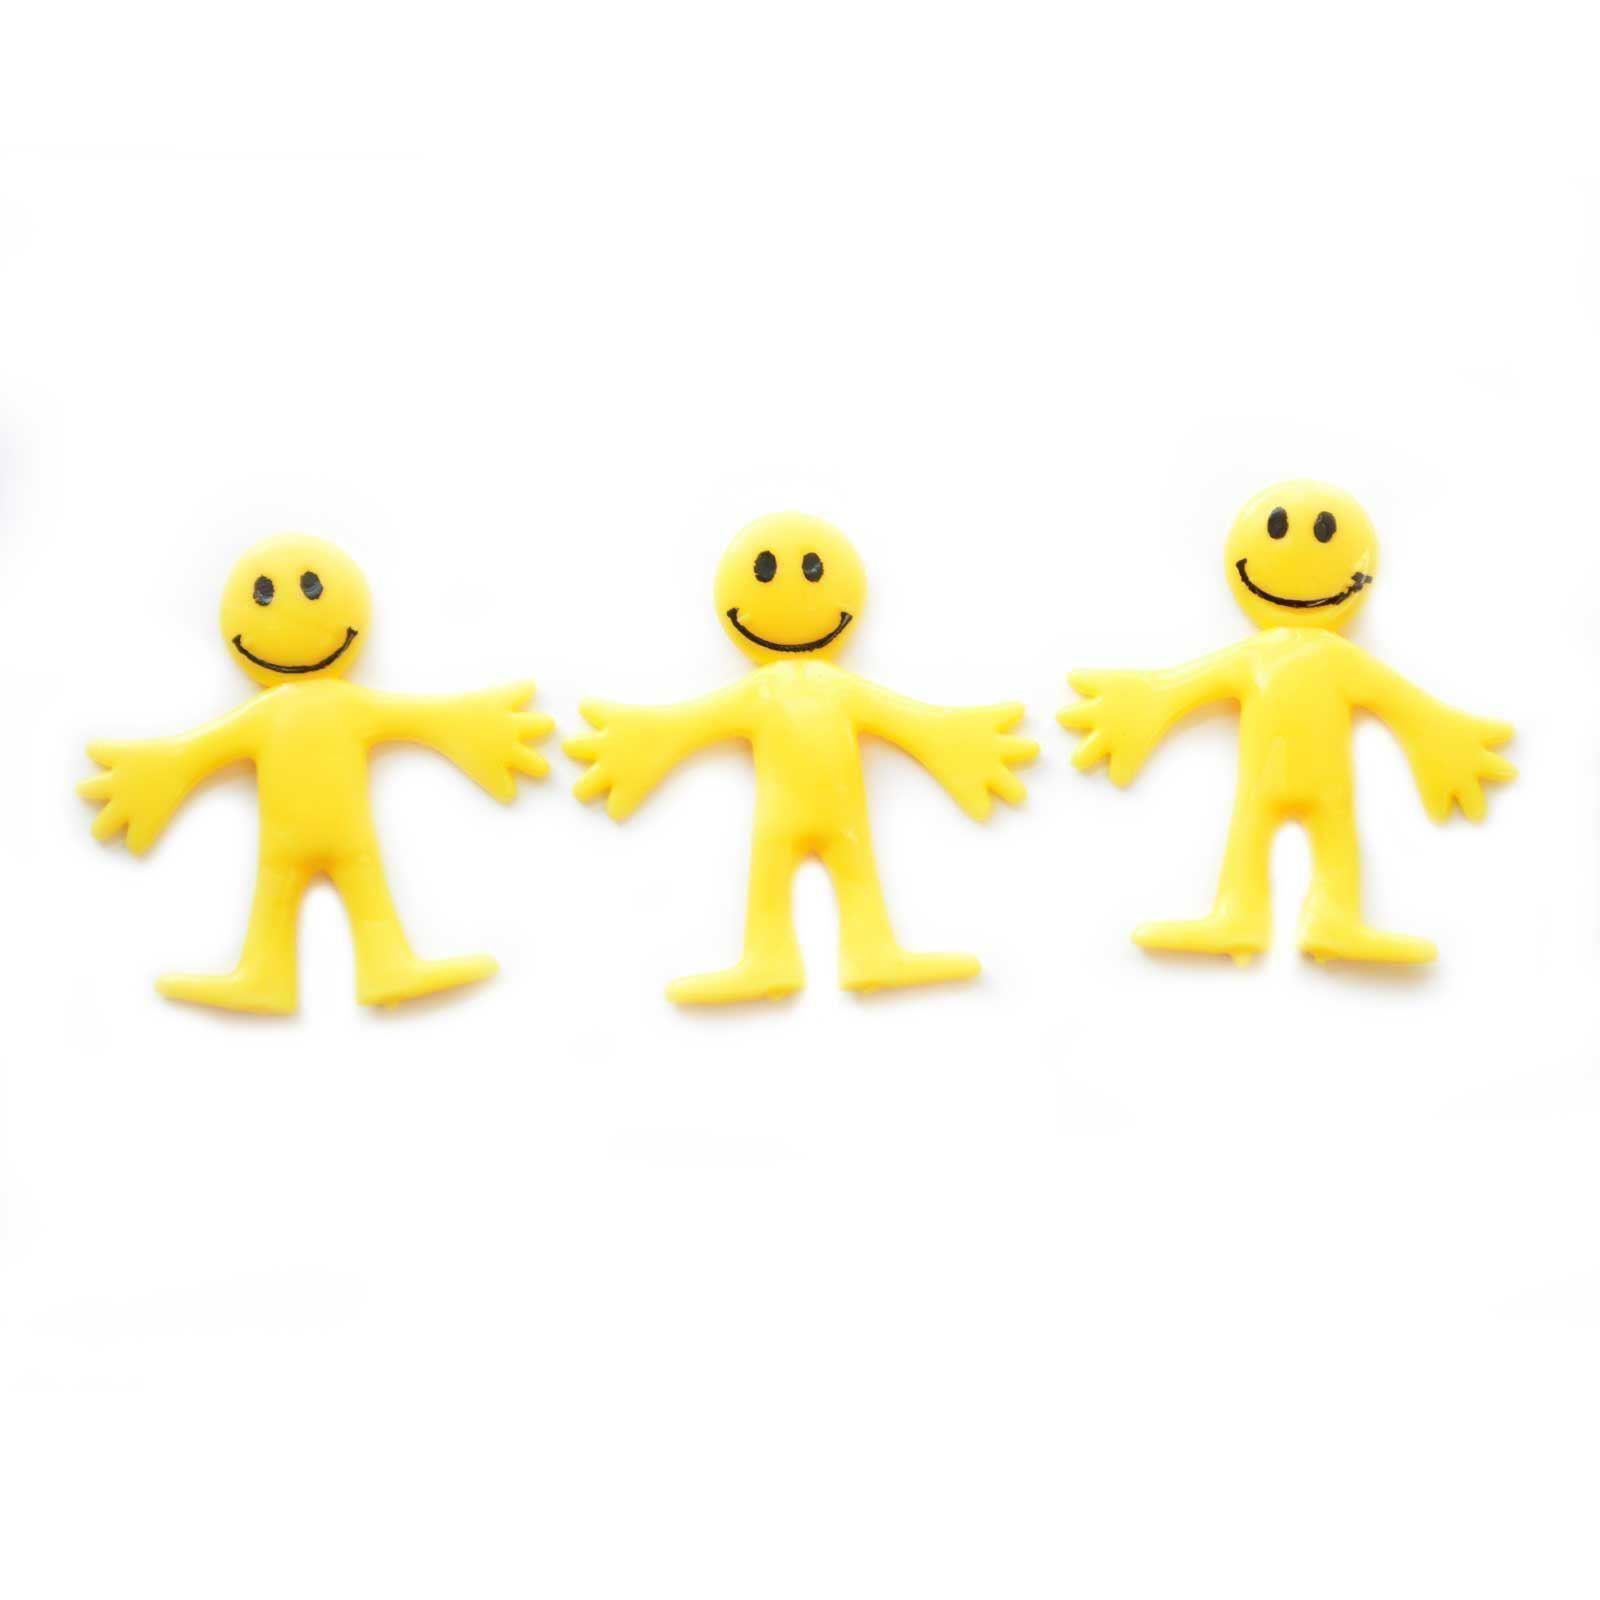 4 x HENBRANDT 20 x Stretchy Smiley Men Party Bags Fillers